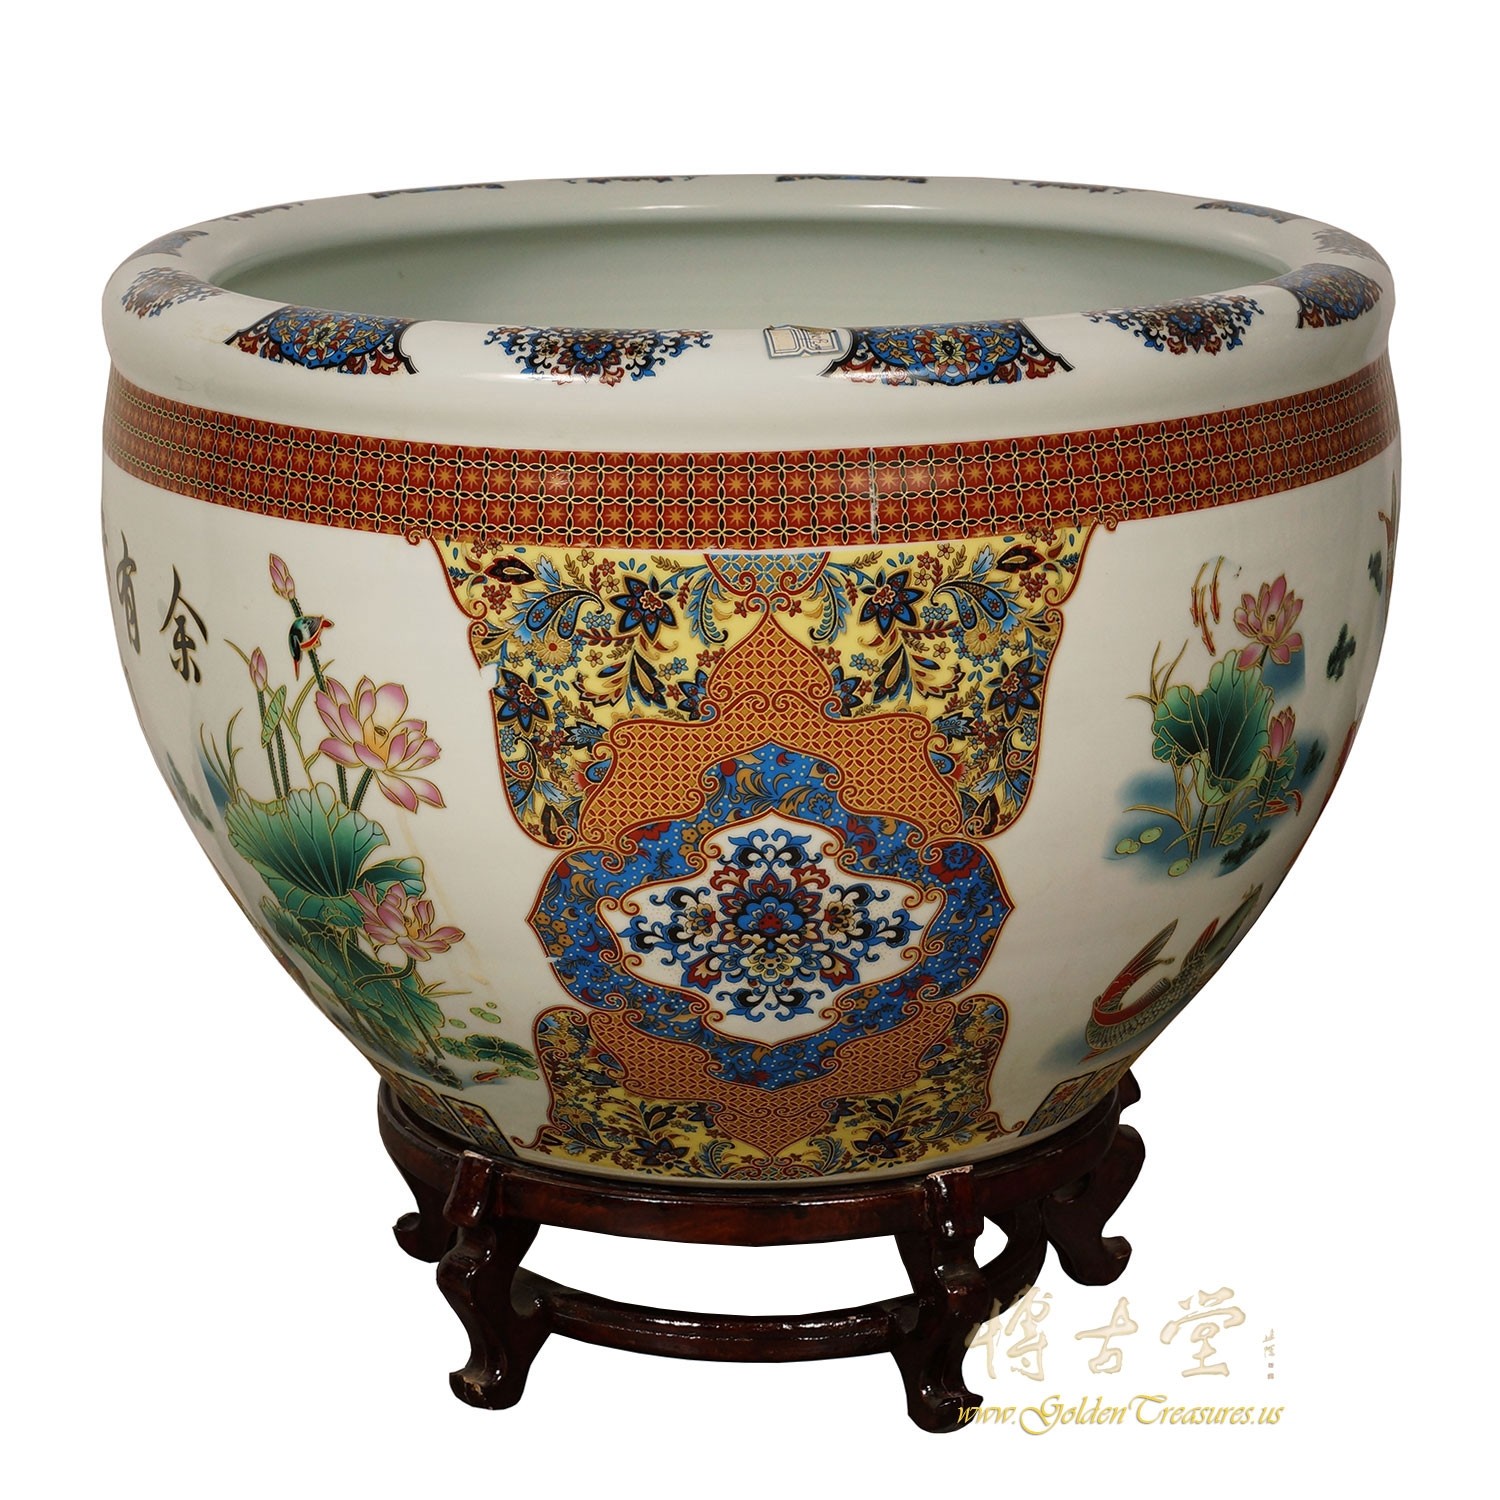 Early 20 Century Antique Chinese Famille Rose Porcelain Fish Bowl, Planter  Chinese Antiques